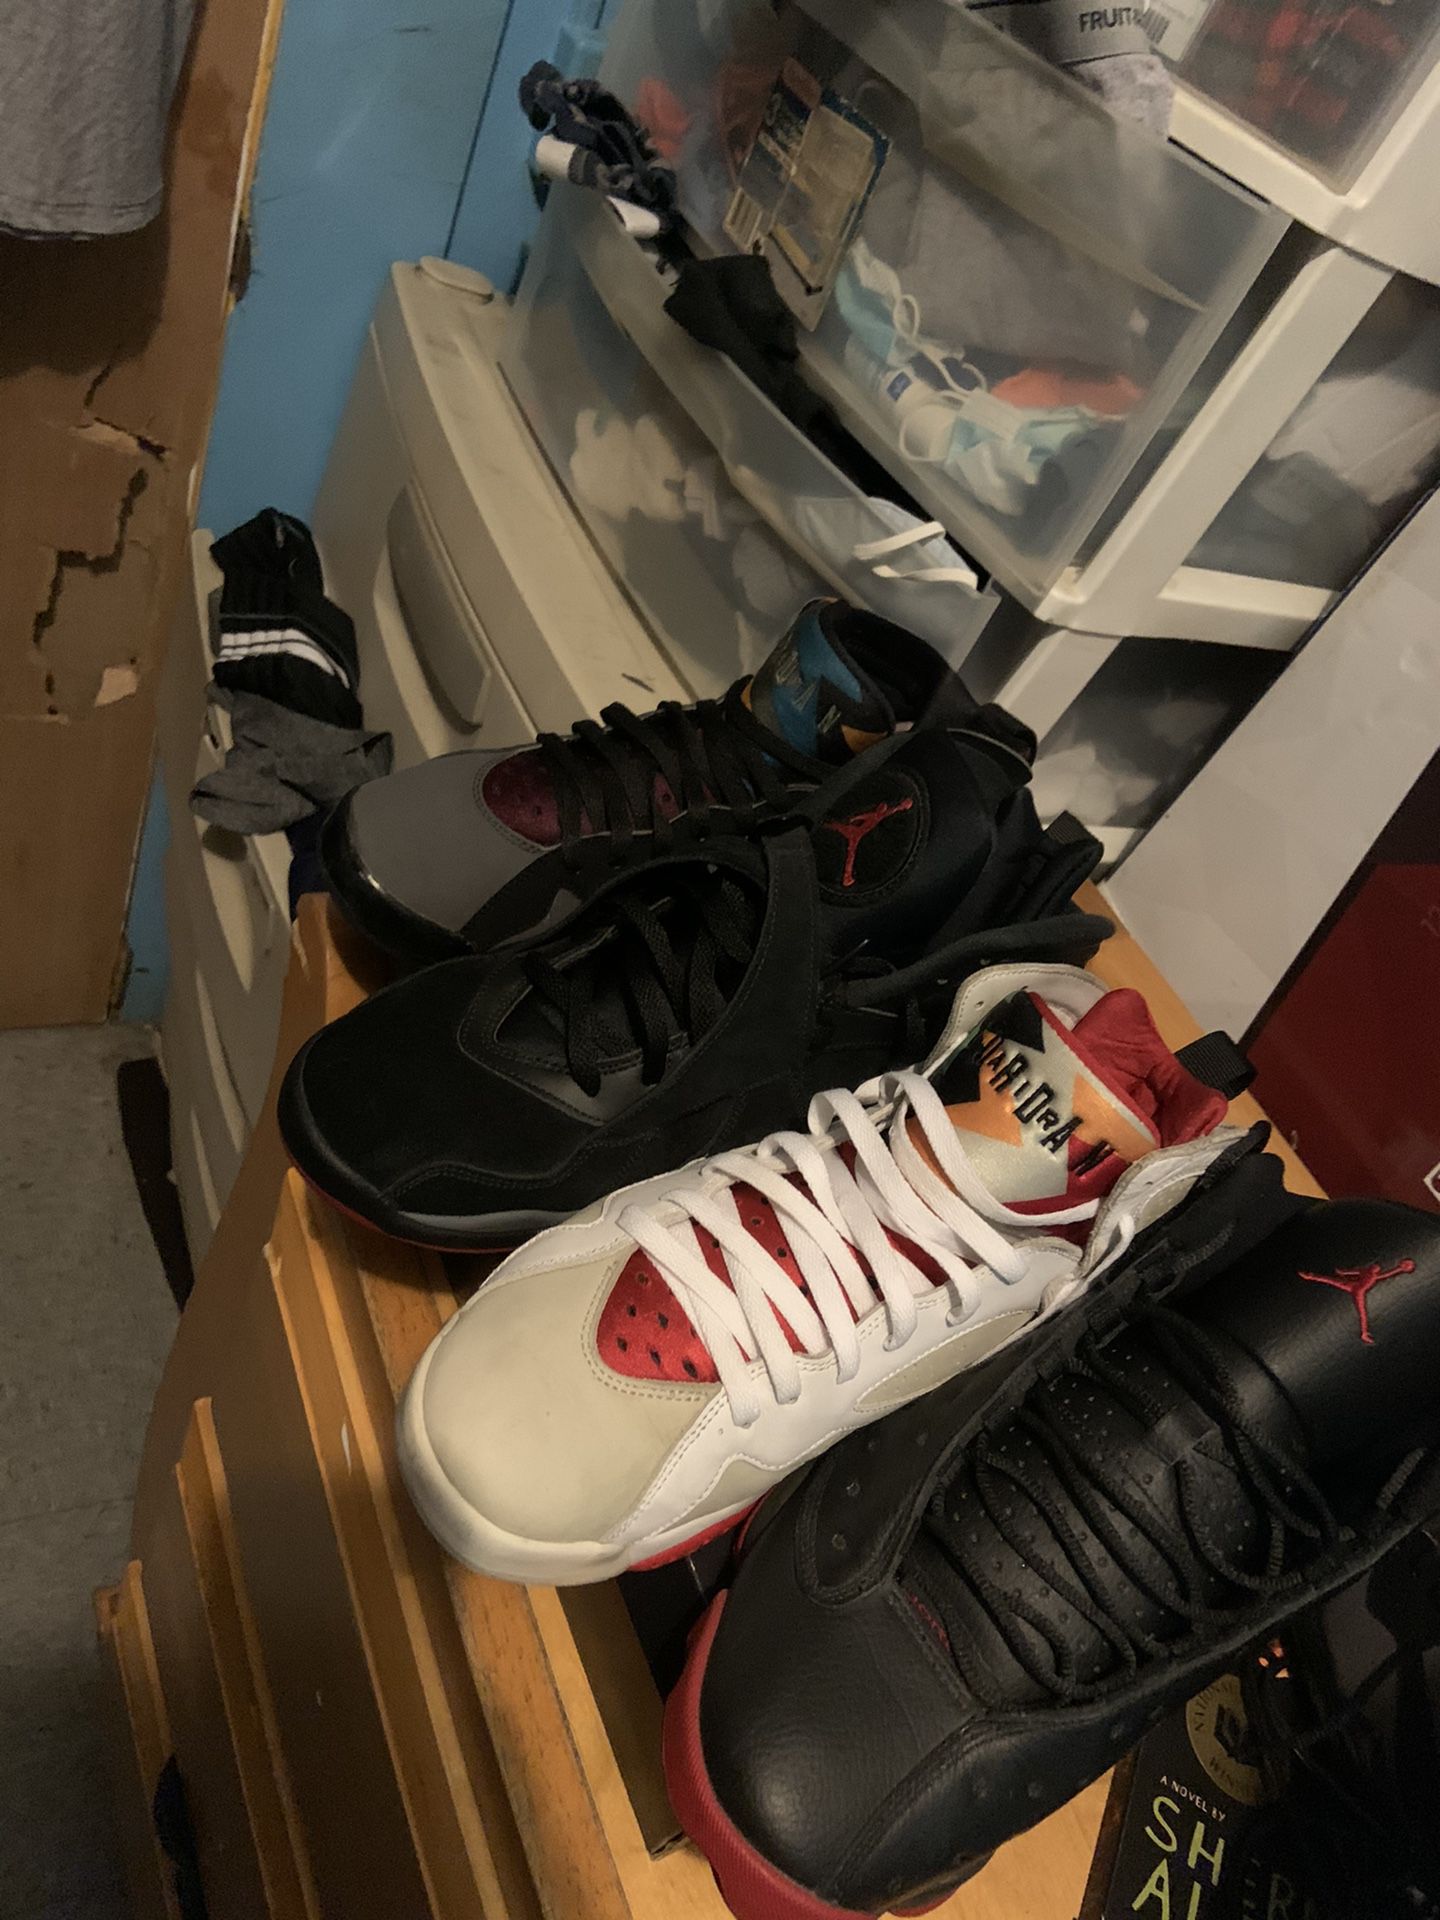 Nike air Jordan retro bordo 7s size 9.5 $160, bred 8s size 10 $160, hare 7s size 10 $140, dirt bred 13s size 10 $160 cash or trade meet in Passaic